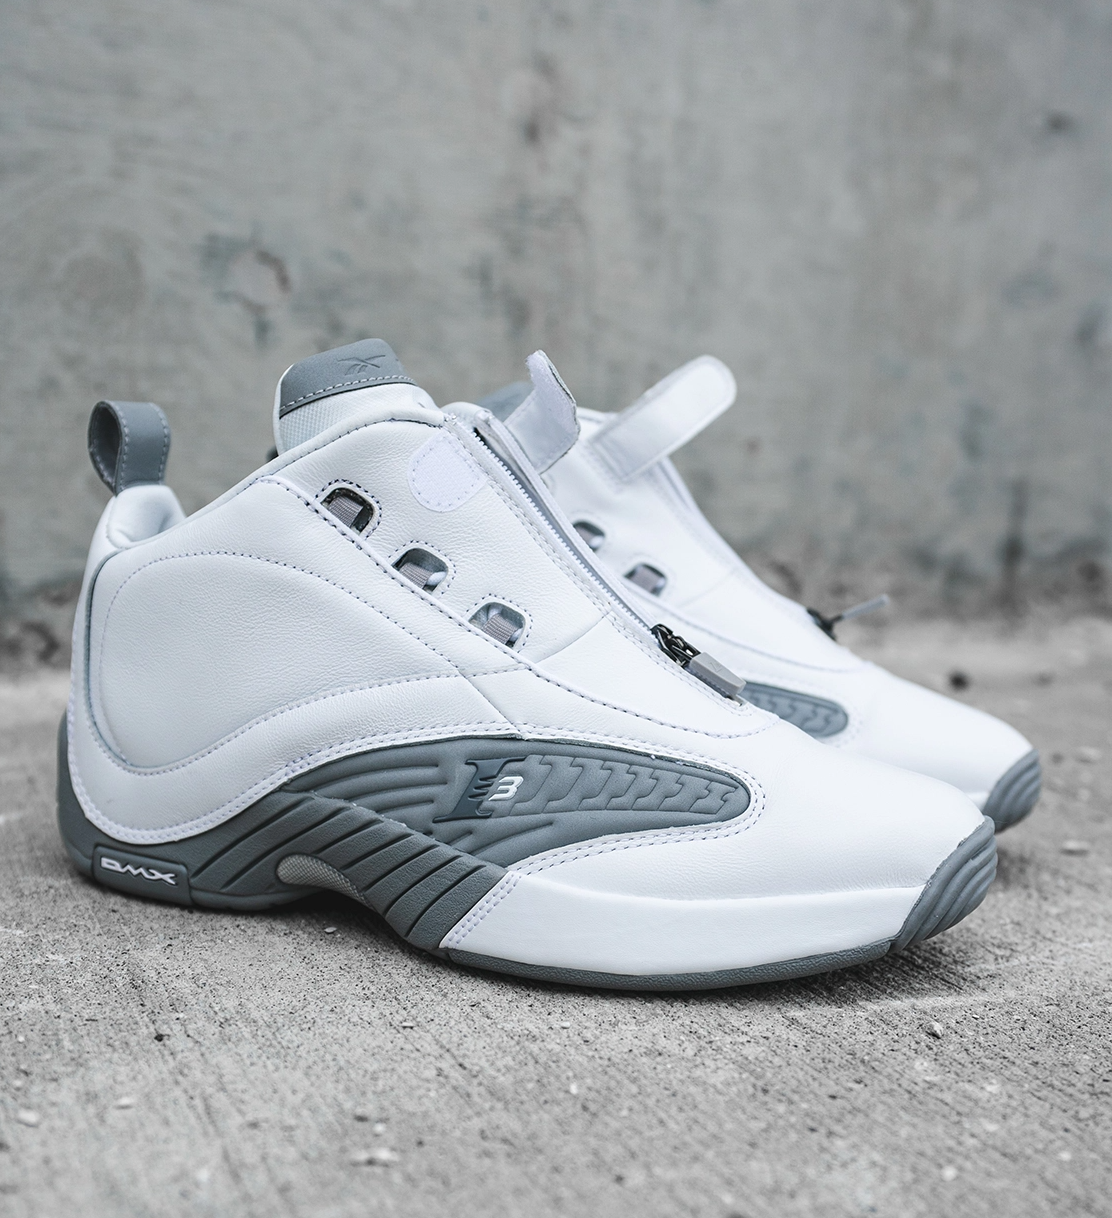 Now Available: Reebok Answer IV 